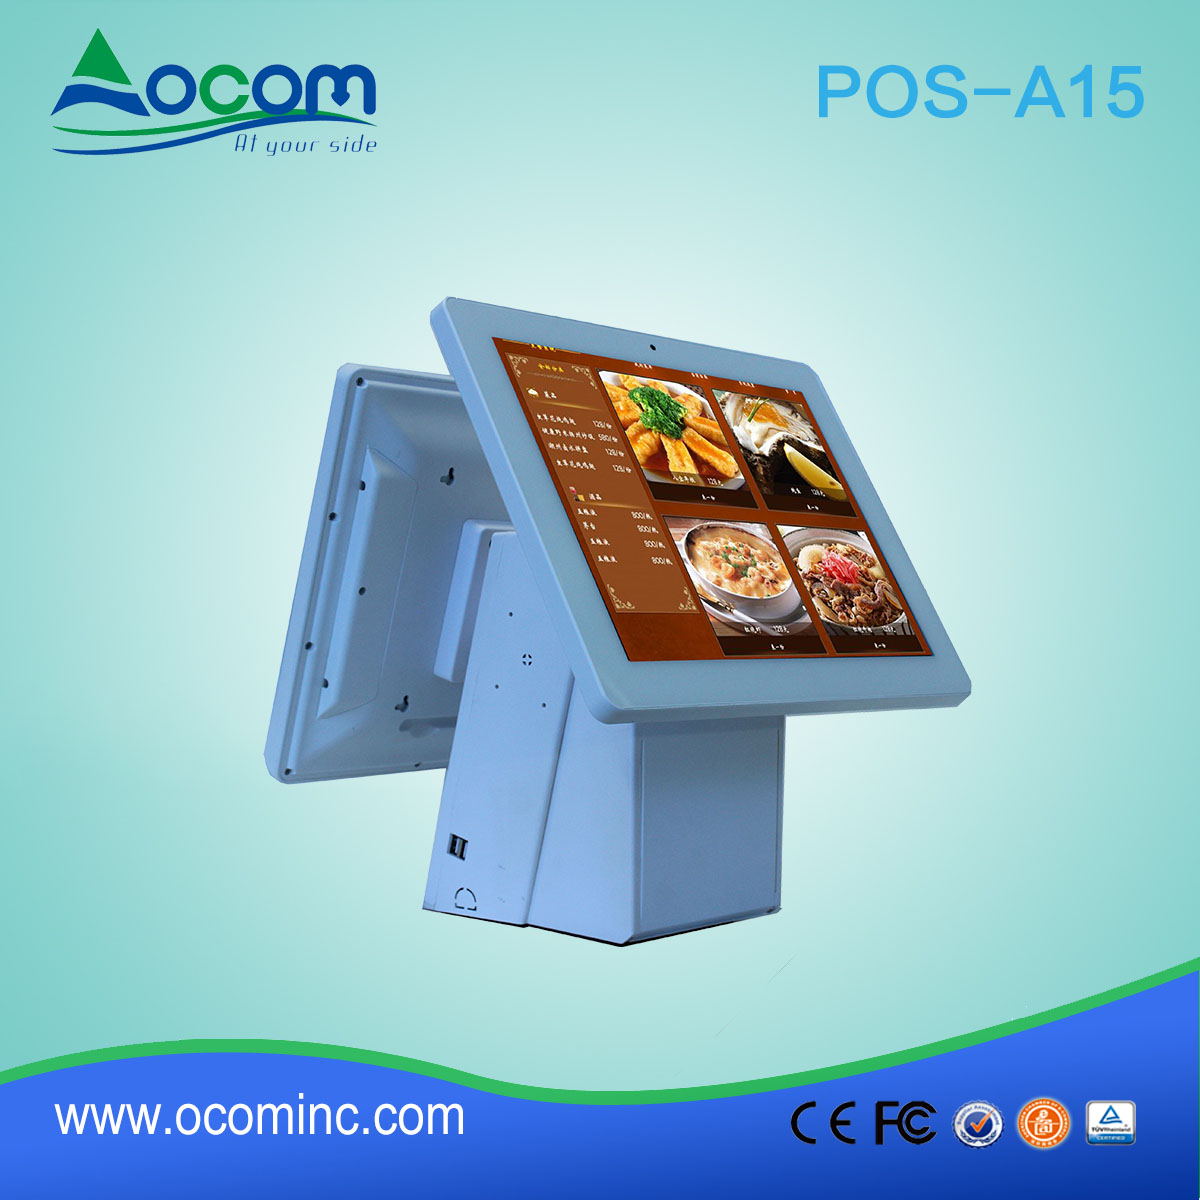 i3/i5 windows system all in one fast food pos system